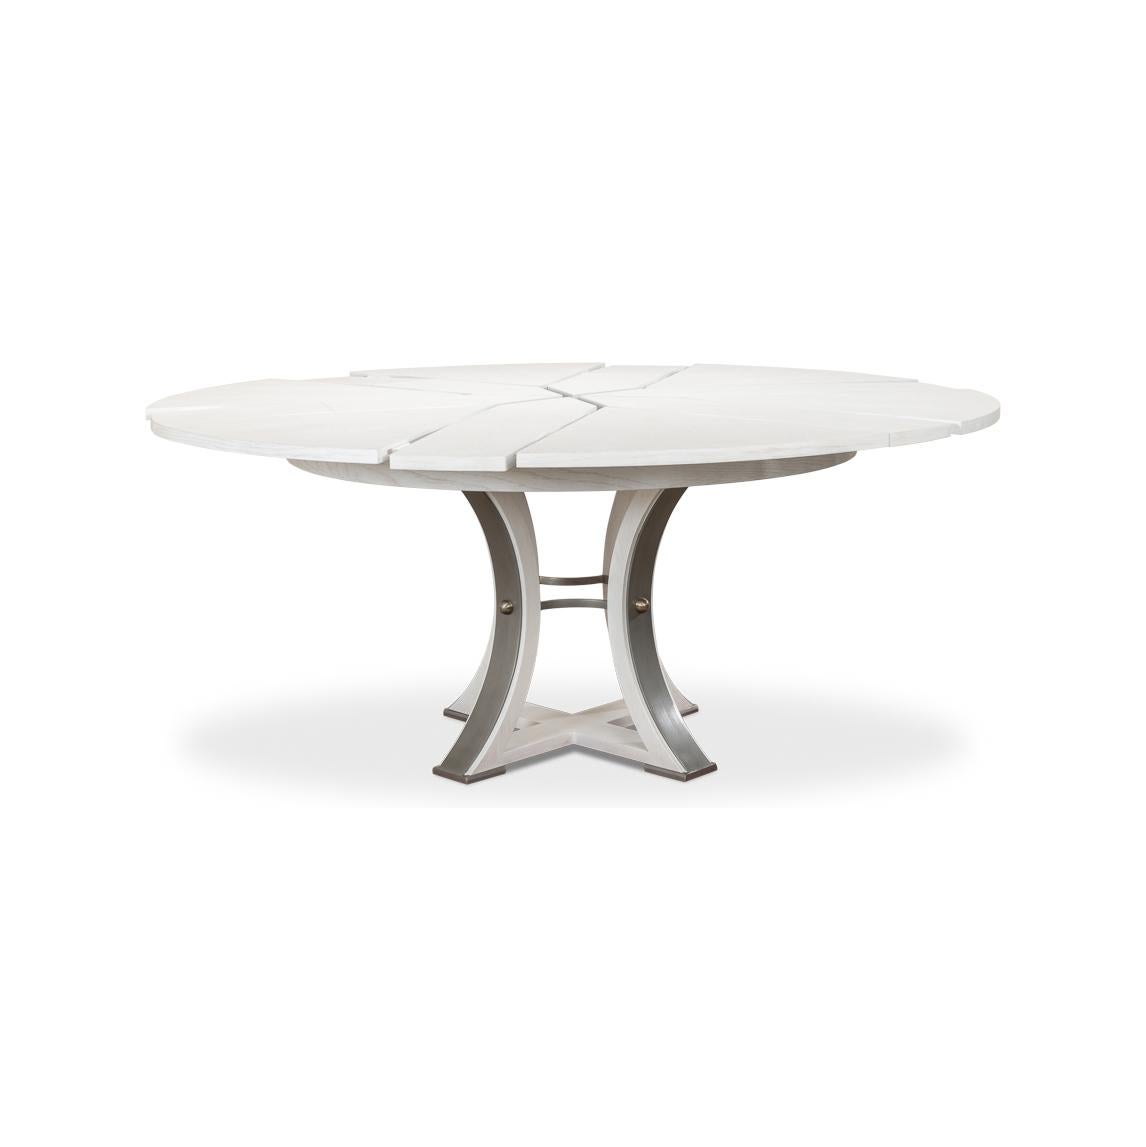 Modern Industrial Dining Table - 70 - Working White In New Condition For Sale In Westwood, NJ